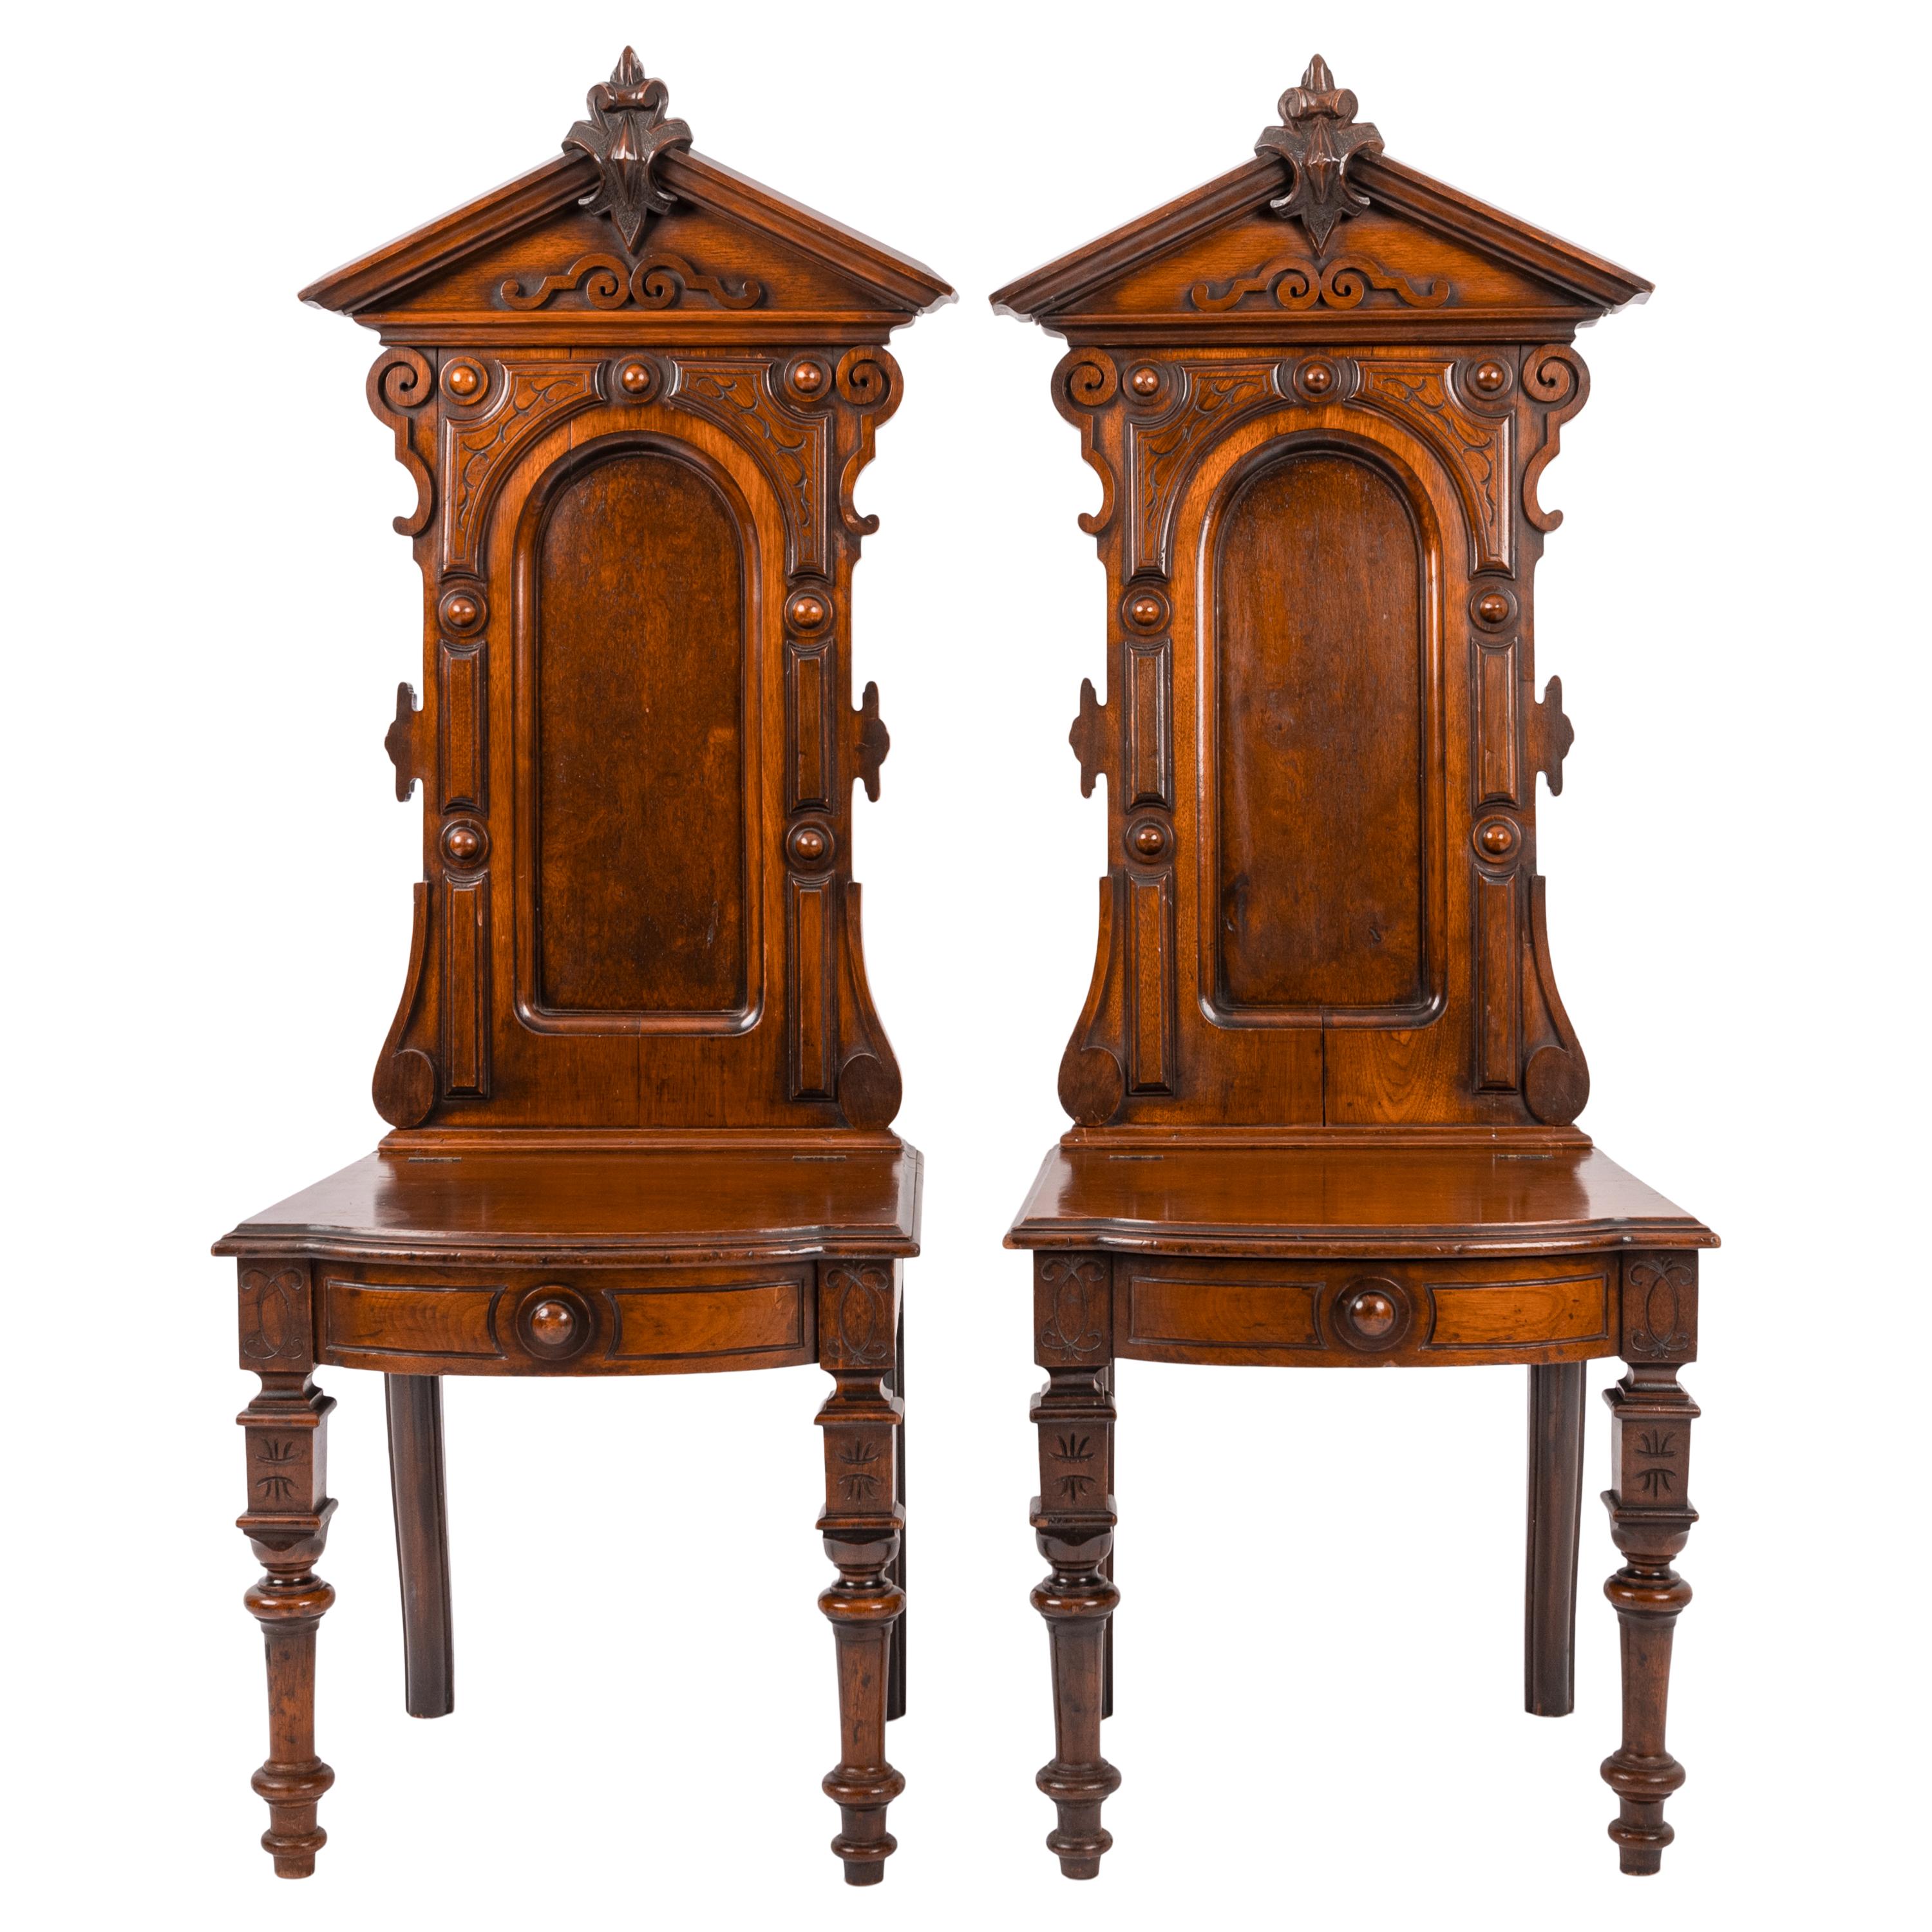 A good pair of antique American Renaissance revival carved walnut hall chairs, circa 1870.
The chair with high backs and having a neo-classical architectural pediment with a carved fleur-de-lis crest, to the center is a burl walnut arched panel,